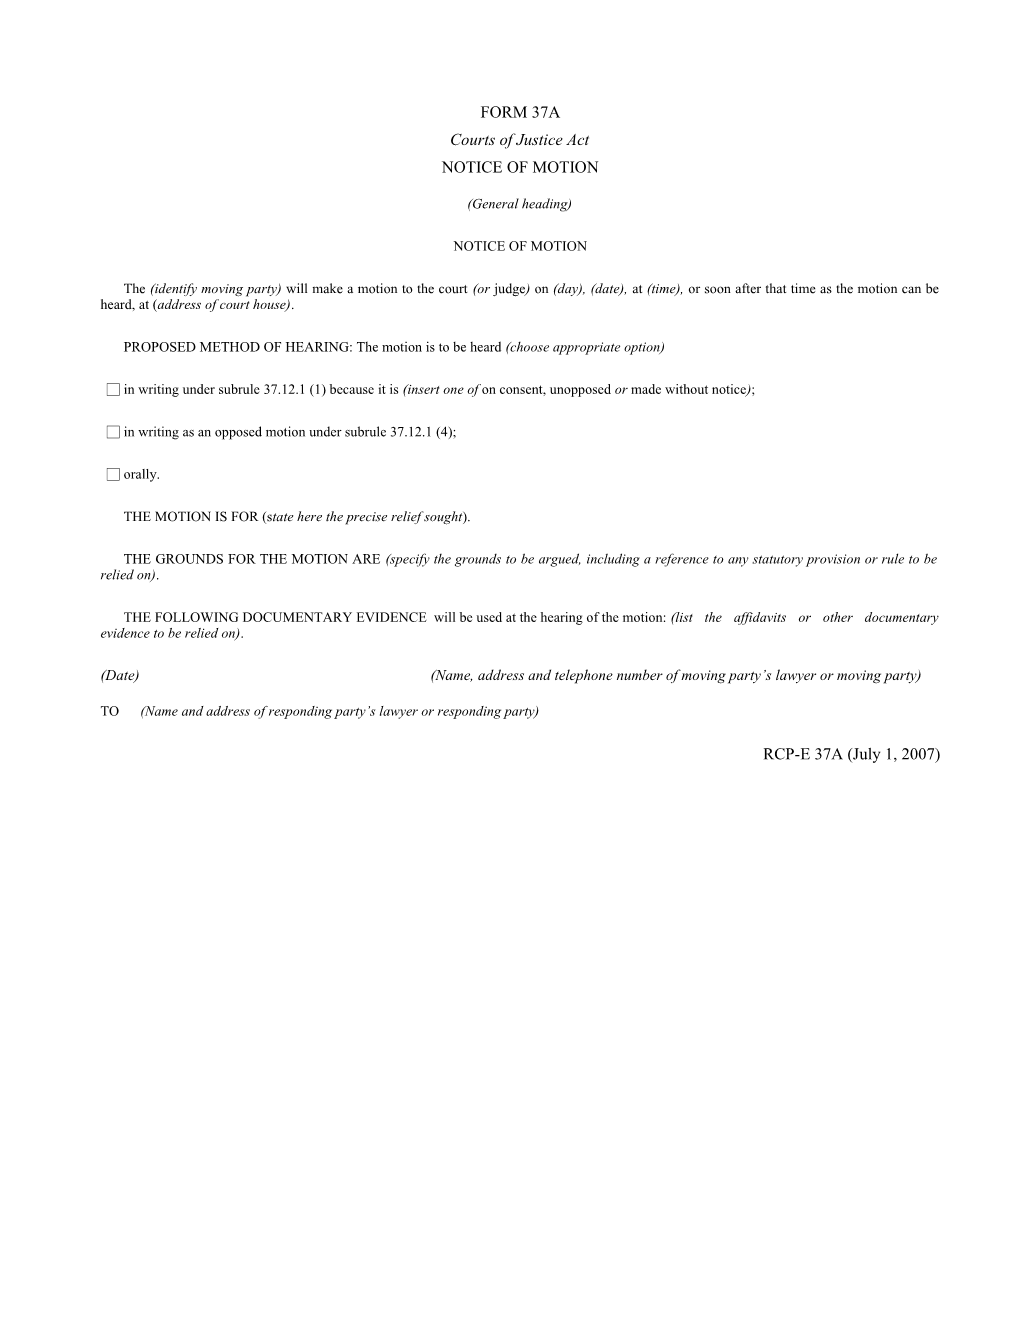 Form 37A Notice of Motion